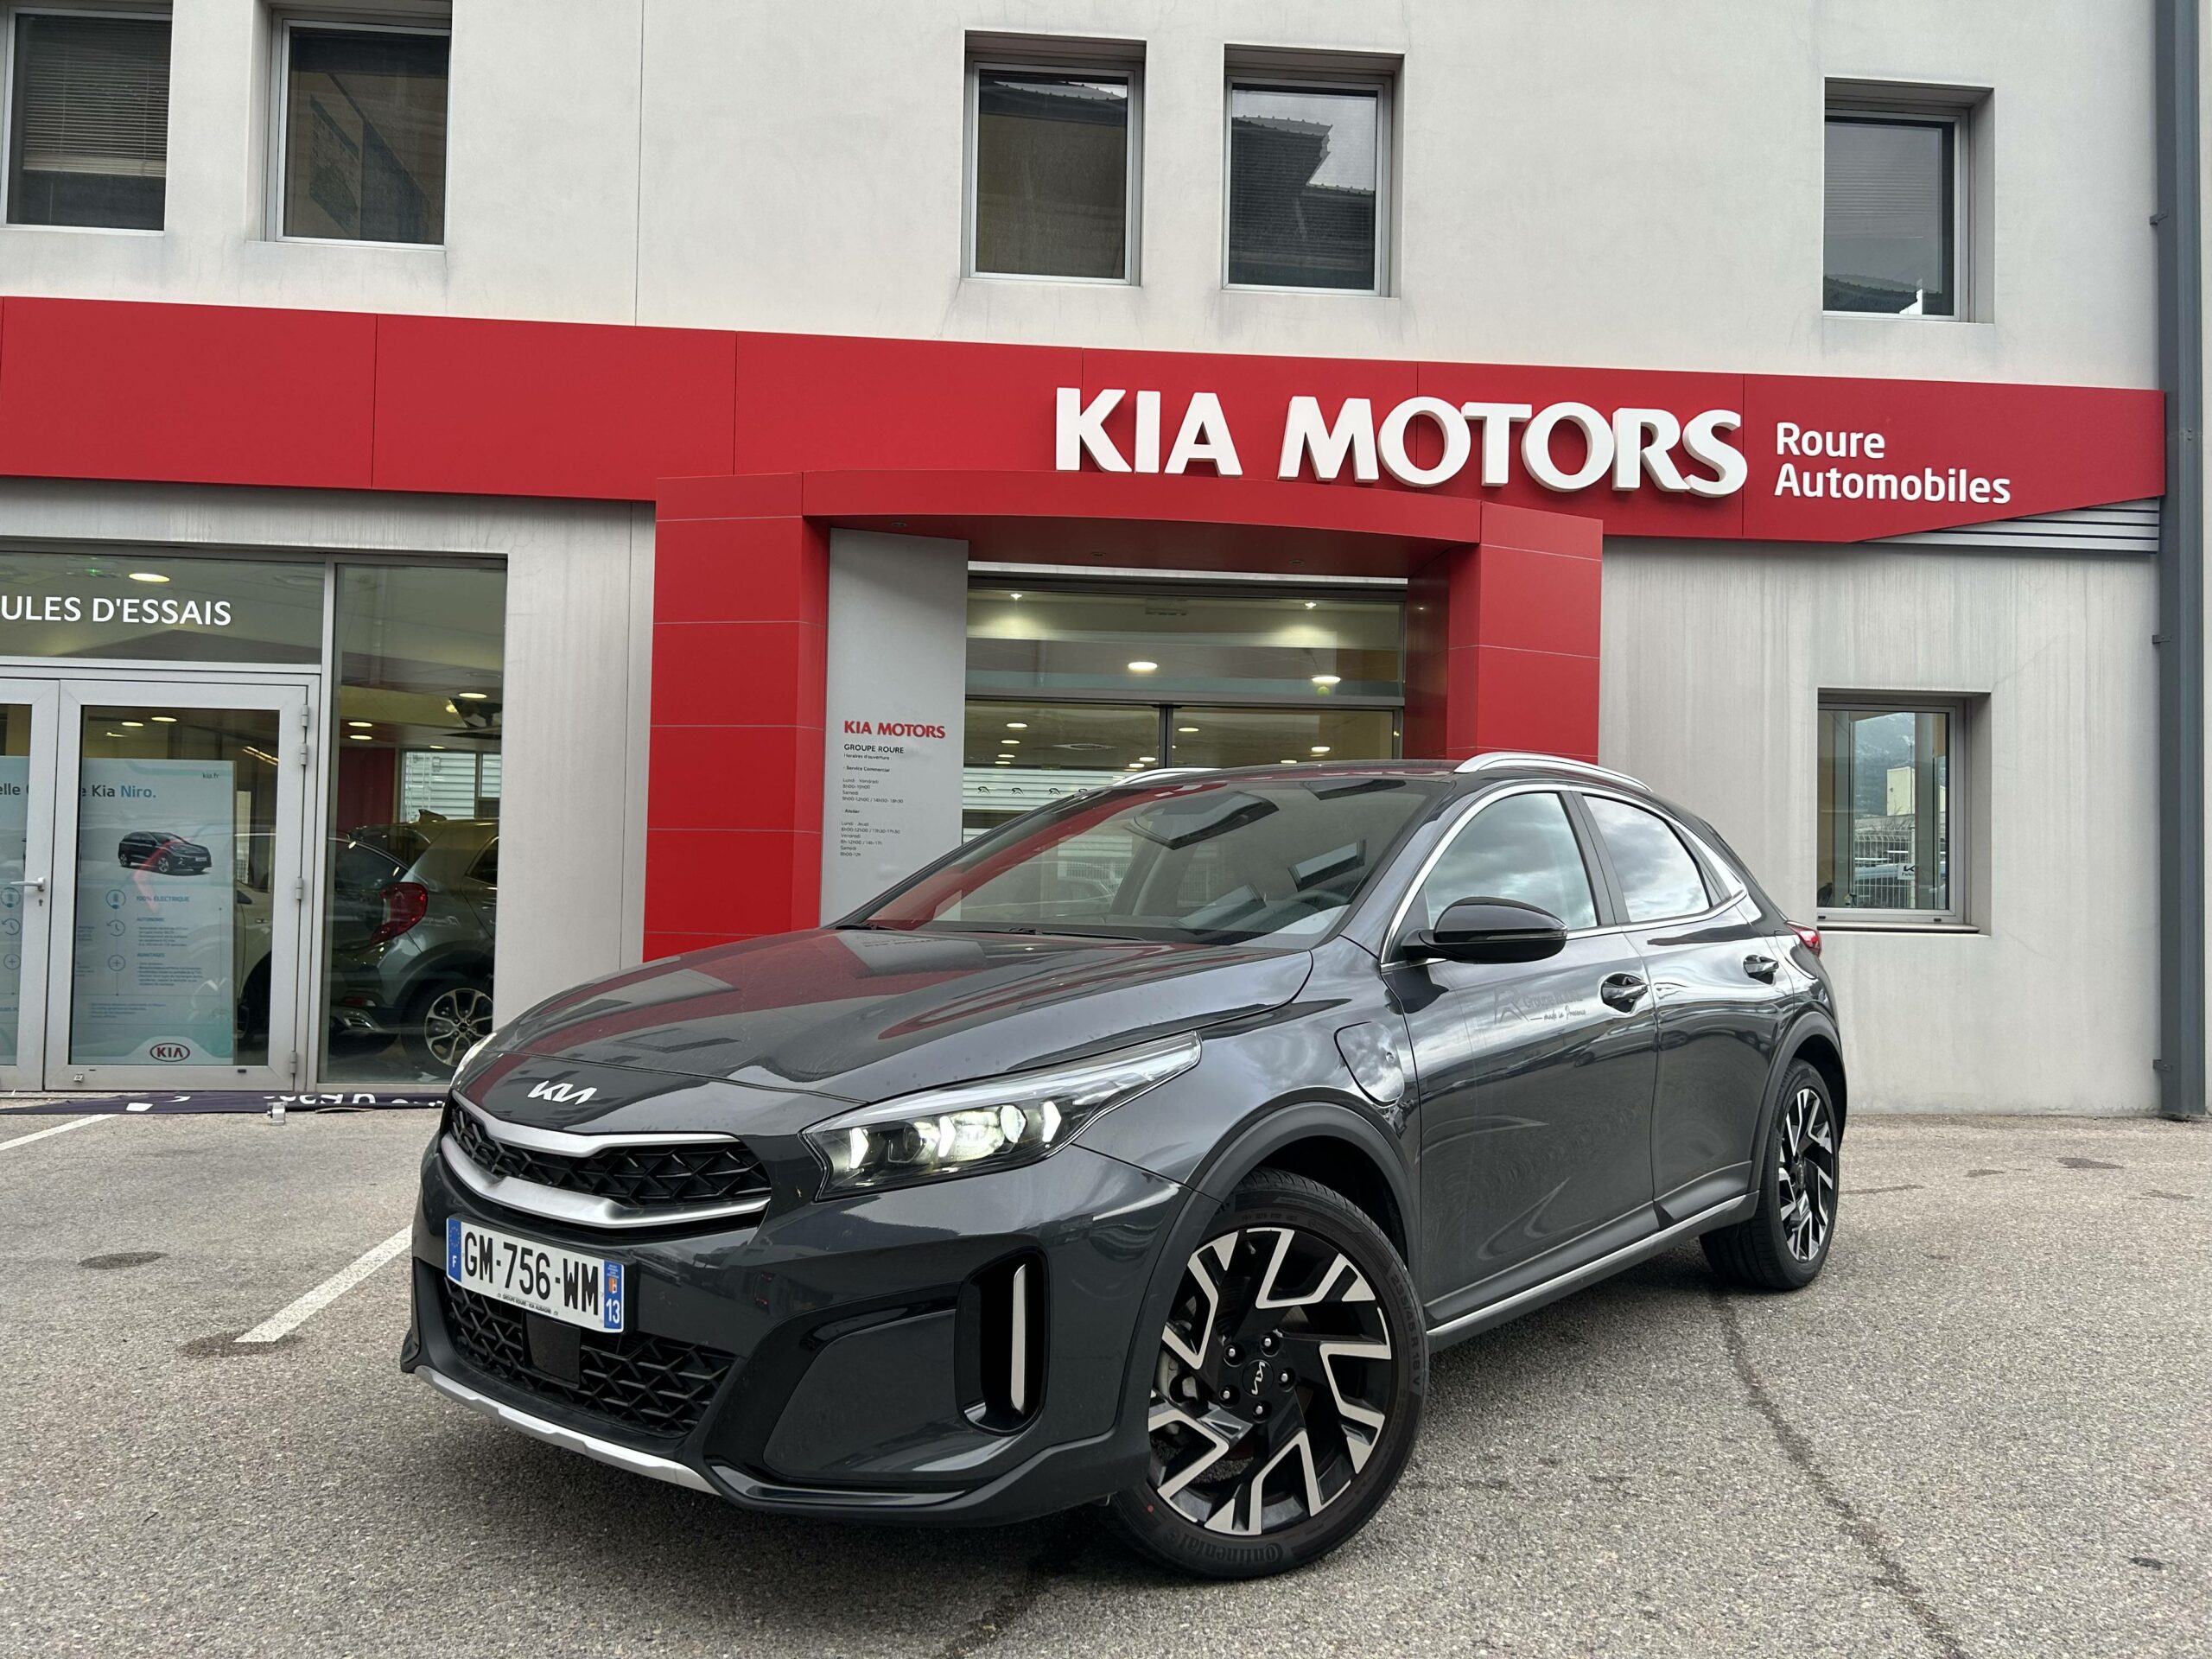 KIA-XCEED-XCeed 1.6 GDi PHEV 141ch DCT6-Lounge-33490-7000-roure-automobiles